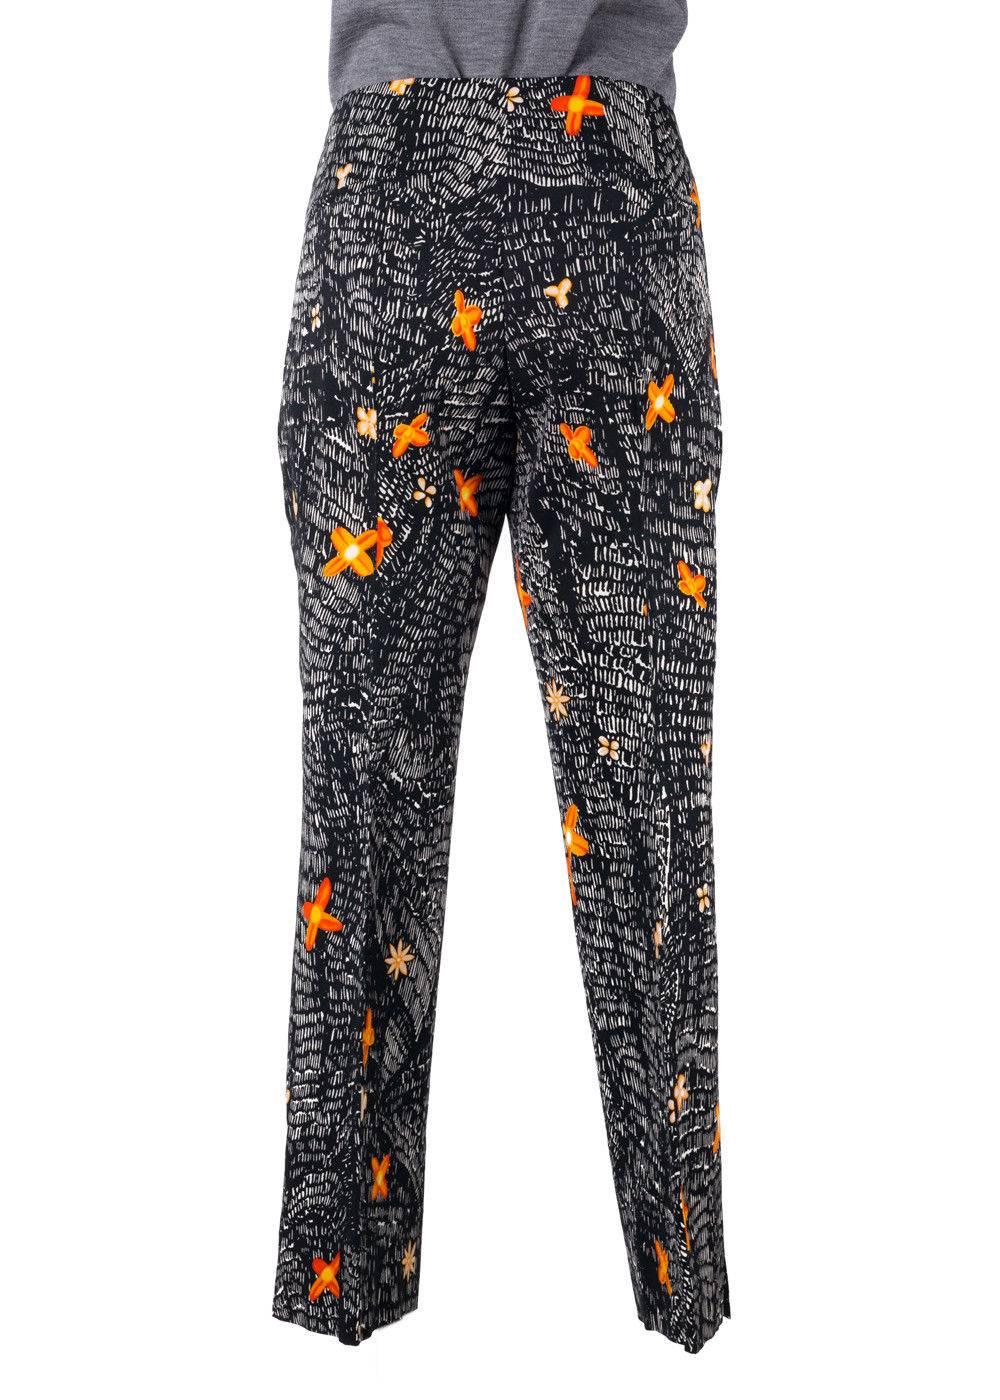 Brand New Prada Womens Floral Trousers
Original Tag
Retails in Stores & Online for $1125
Women's Size EUR 38 / US 0 Fits True to Size

Walk through with confidence in your Floral Prada Trousers. Allow yourself to be one of a kind in this orange